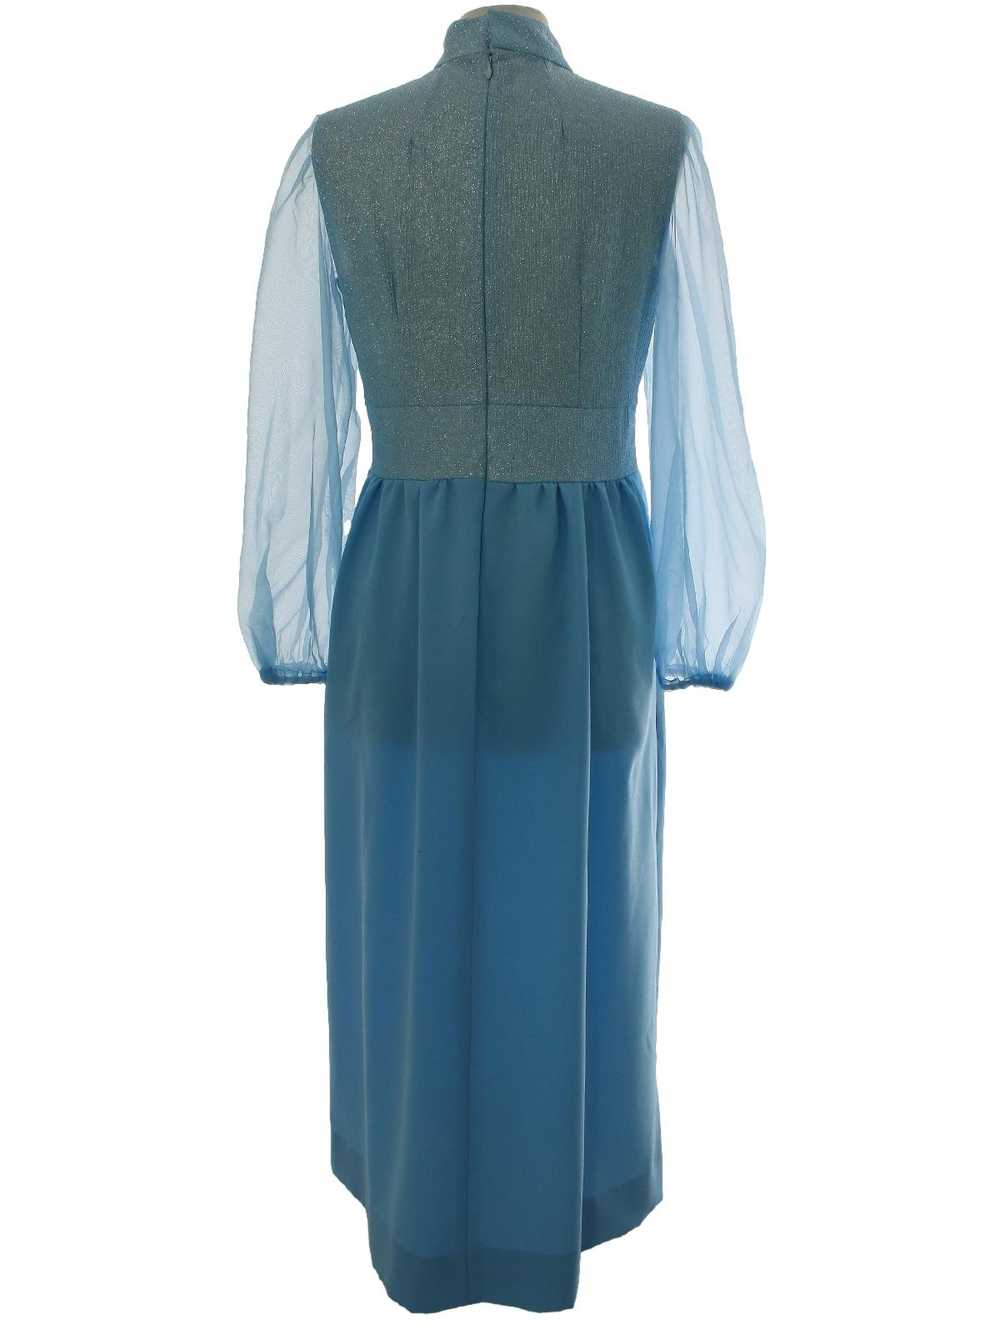 1970's Mod Prom or Cocktail Maxi Dress - image 3